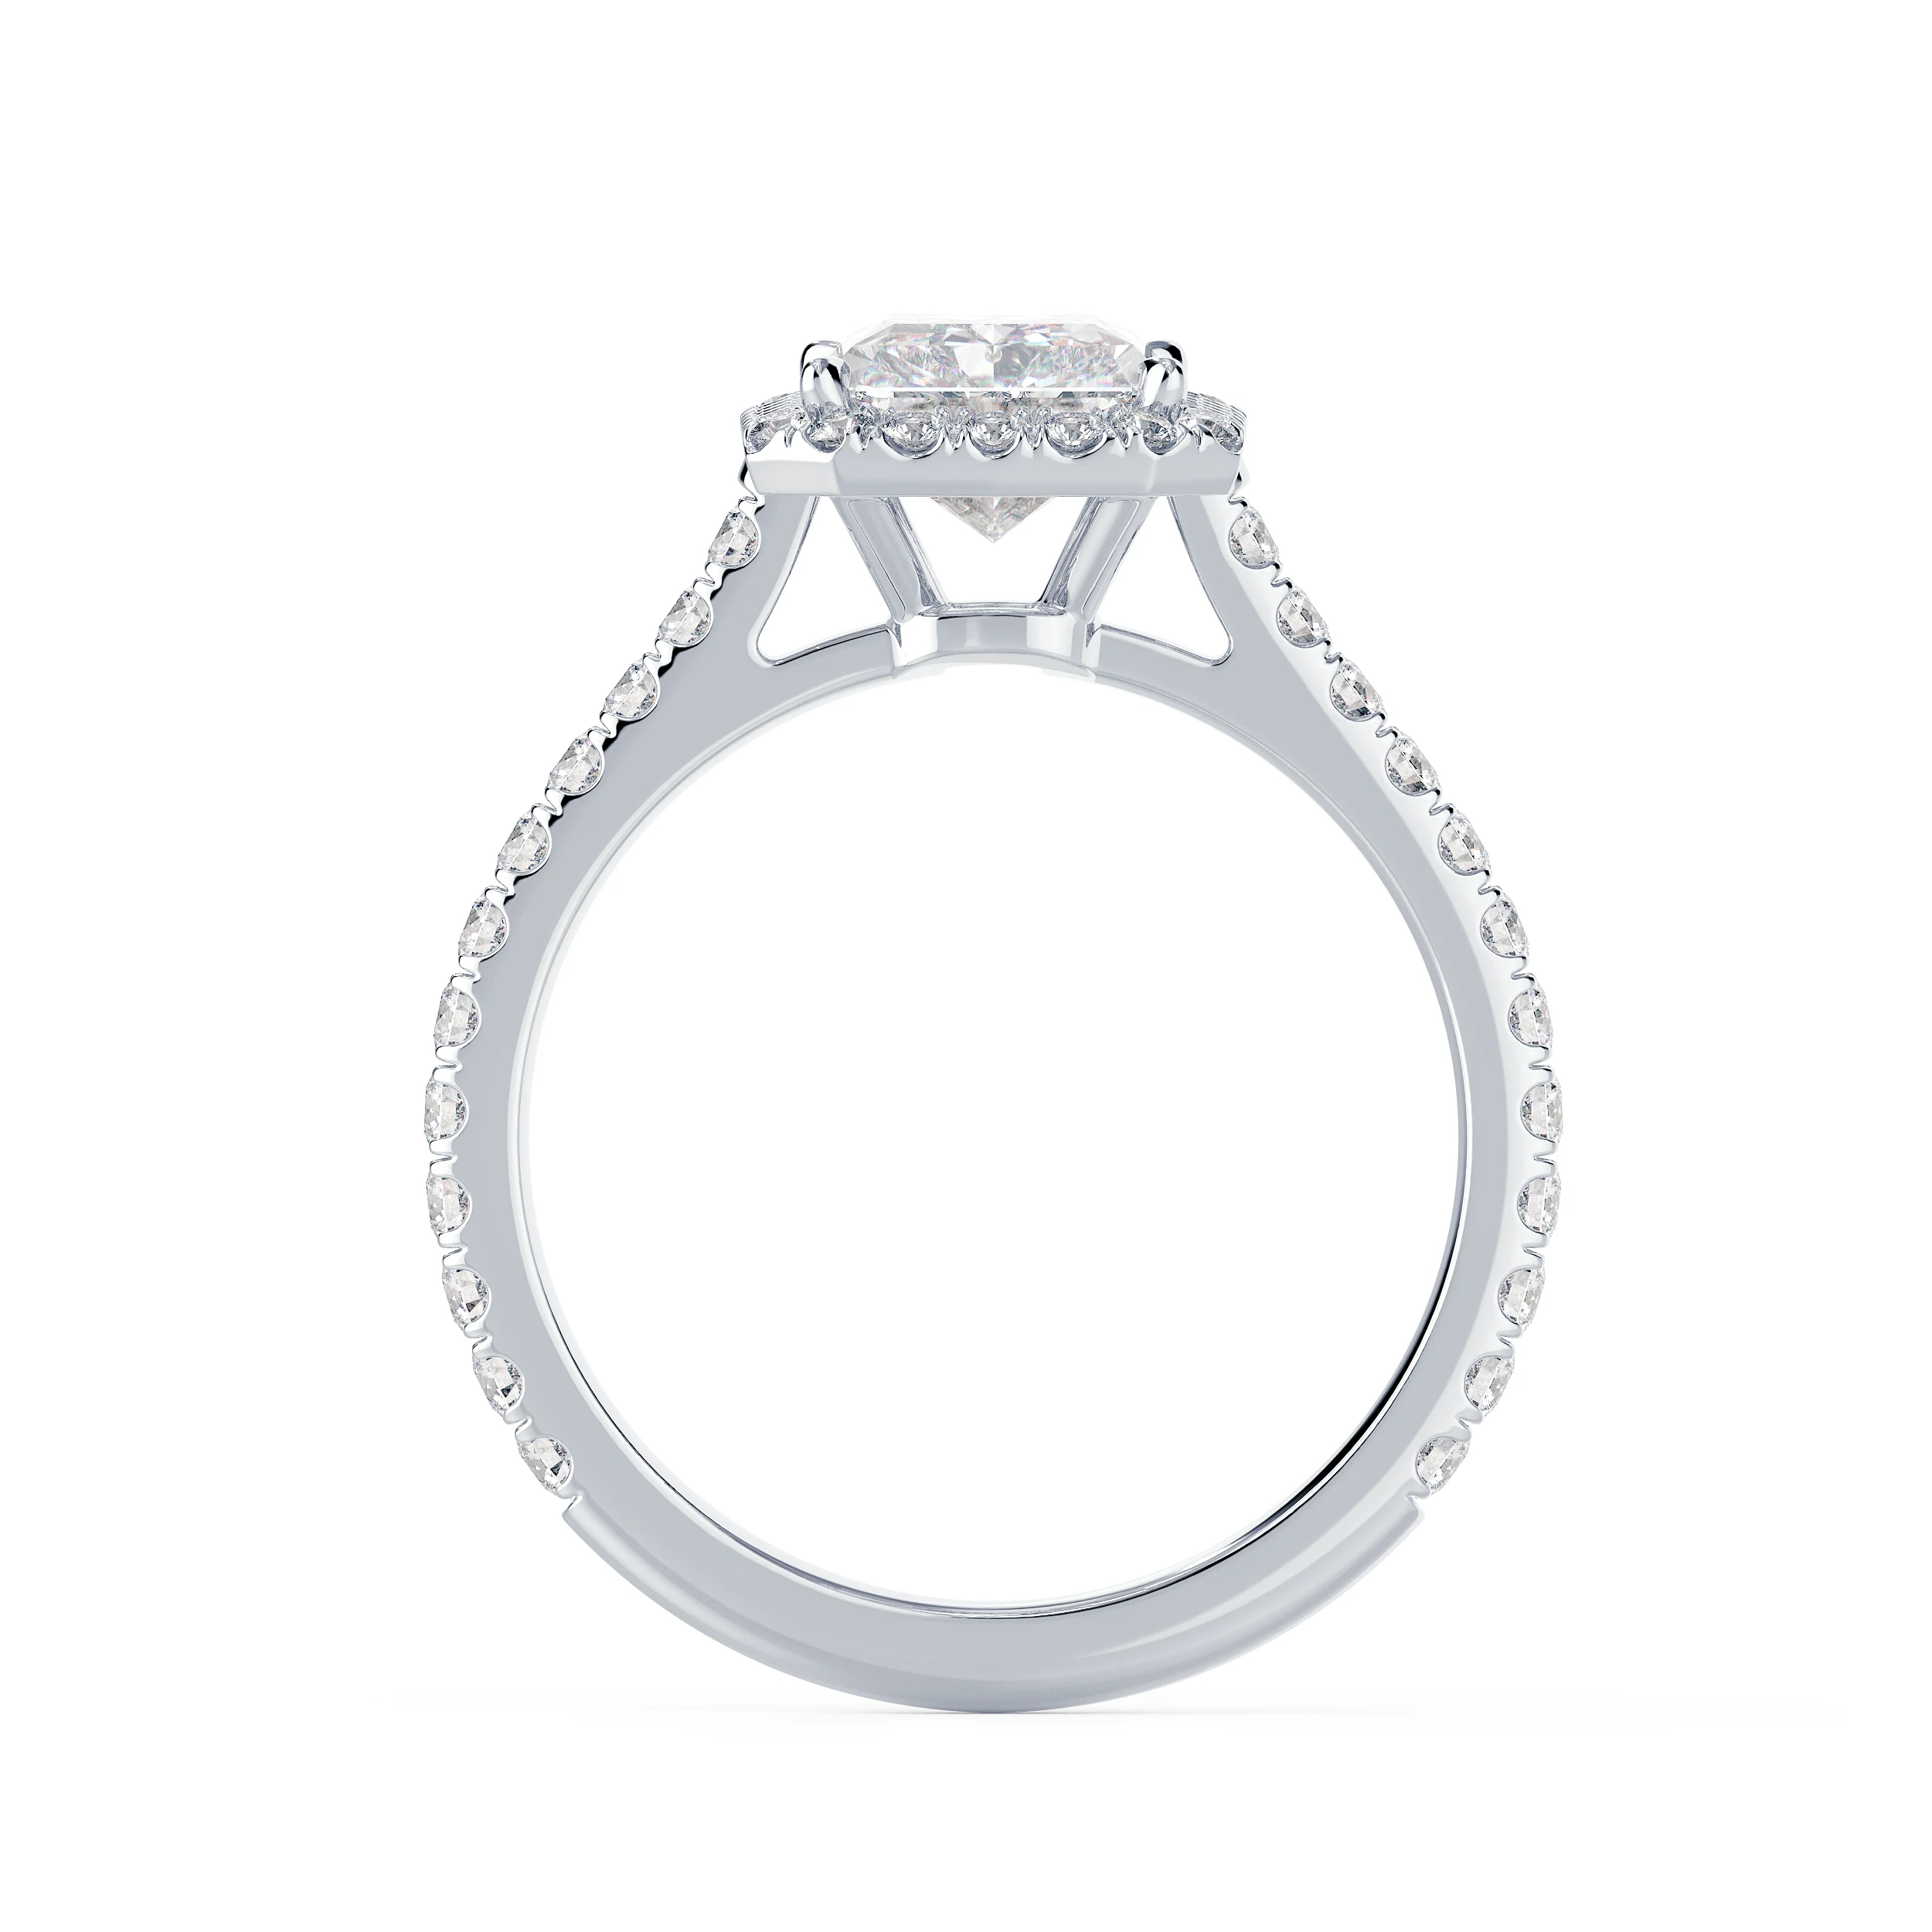 18k White Gold Radiant Halo Pavé Setting featuring High Quality 2.0 ct Diamonds (Profile View)